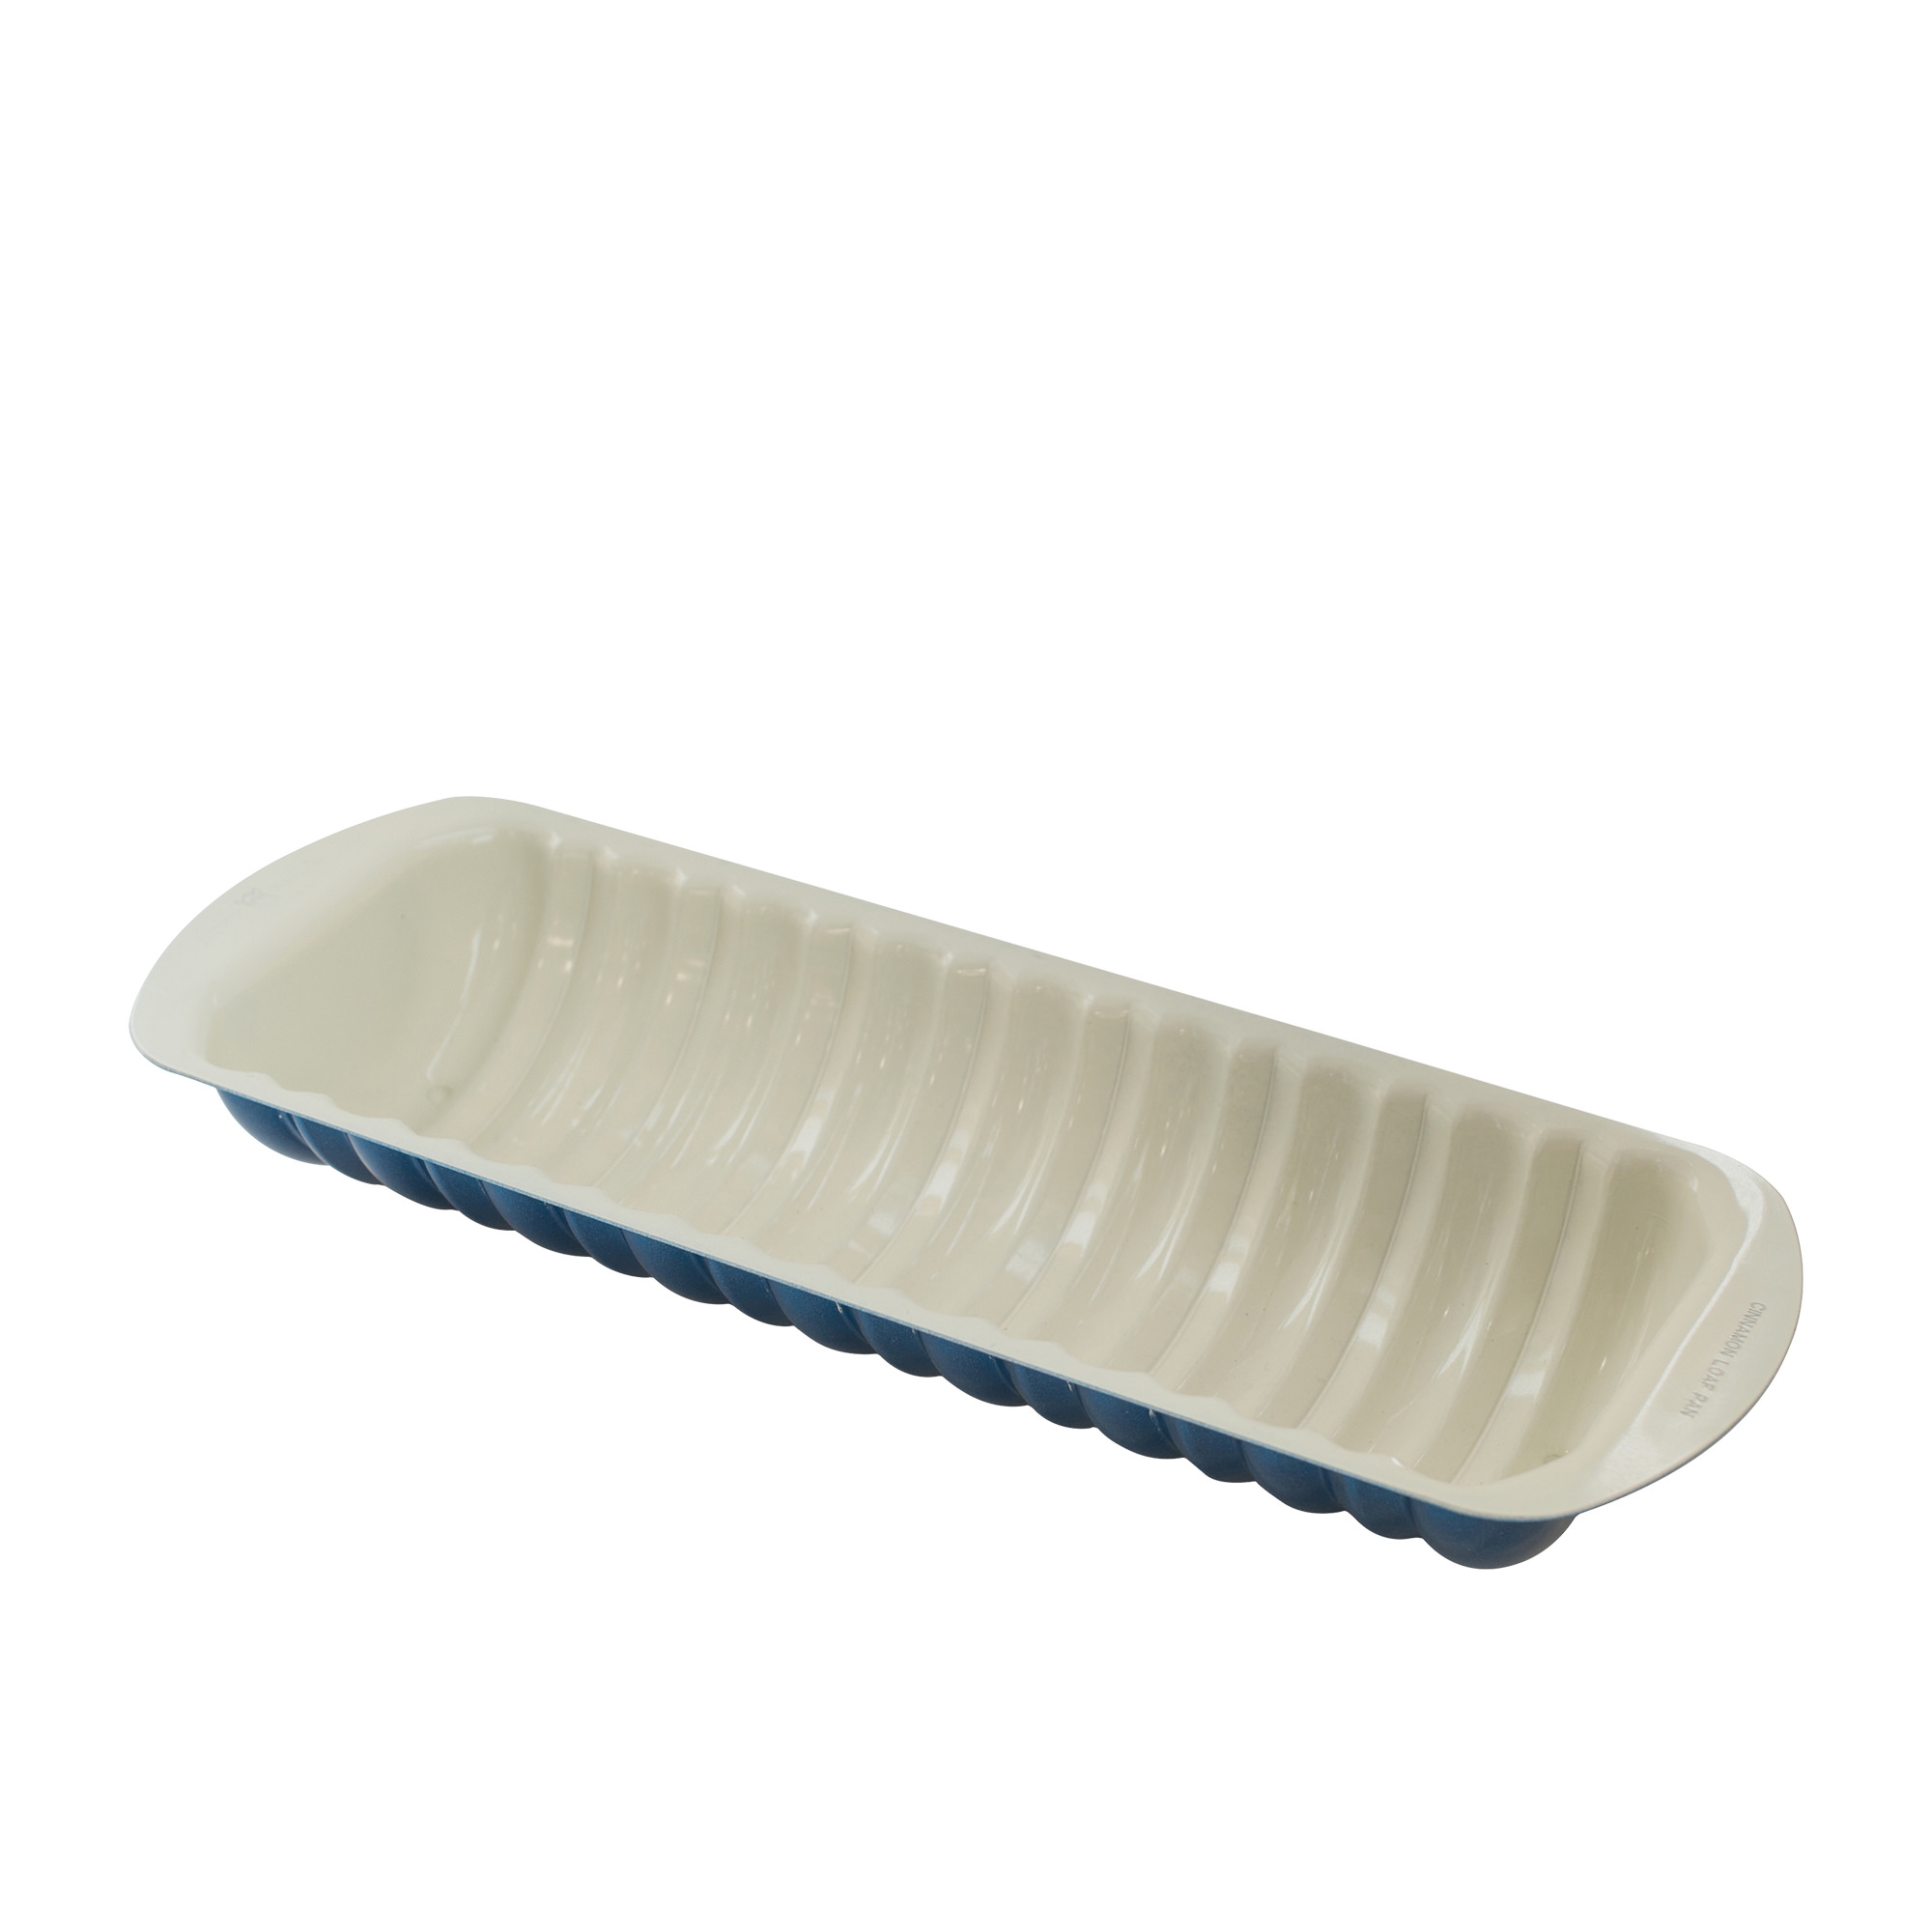 Nordic Ware Cinnamon Bread and Almond Loaf Pan 34.5cm Blue Image 1